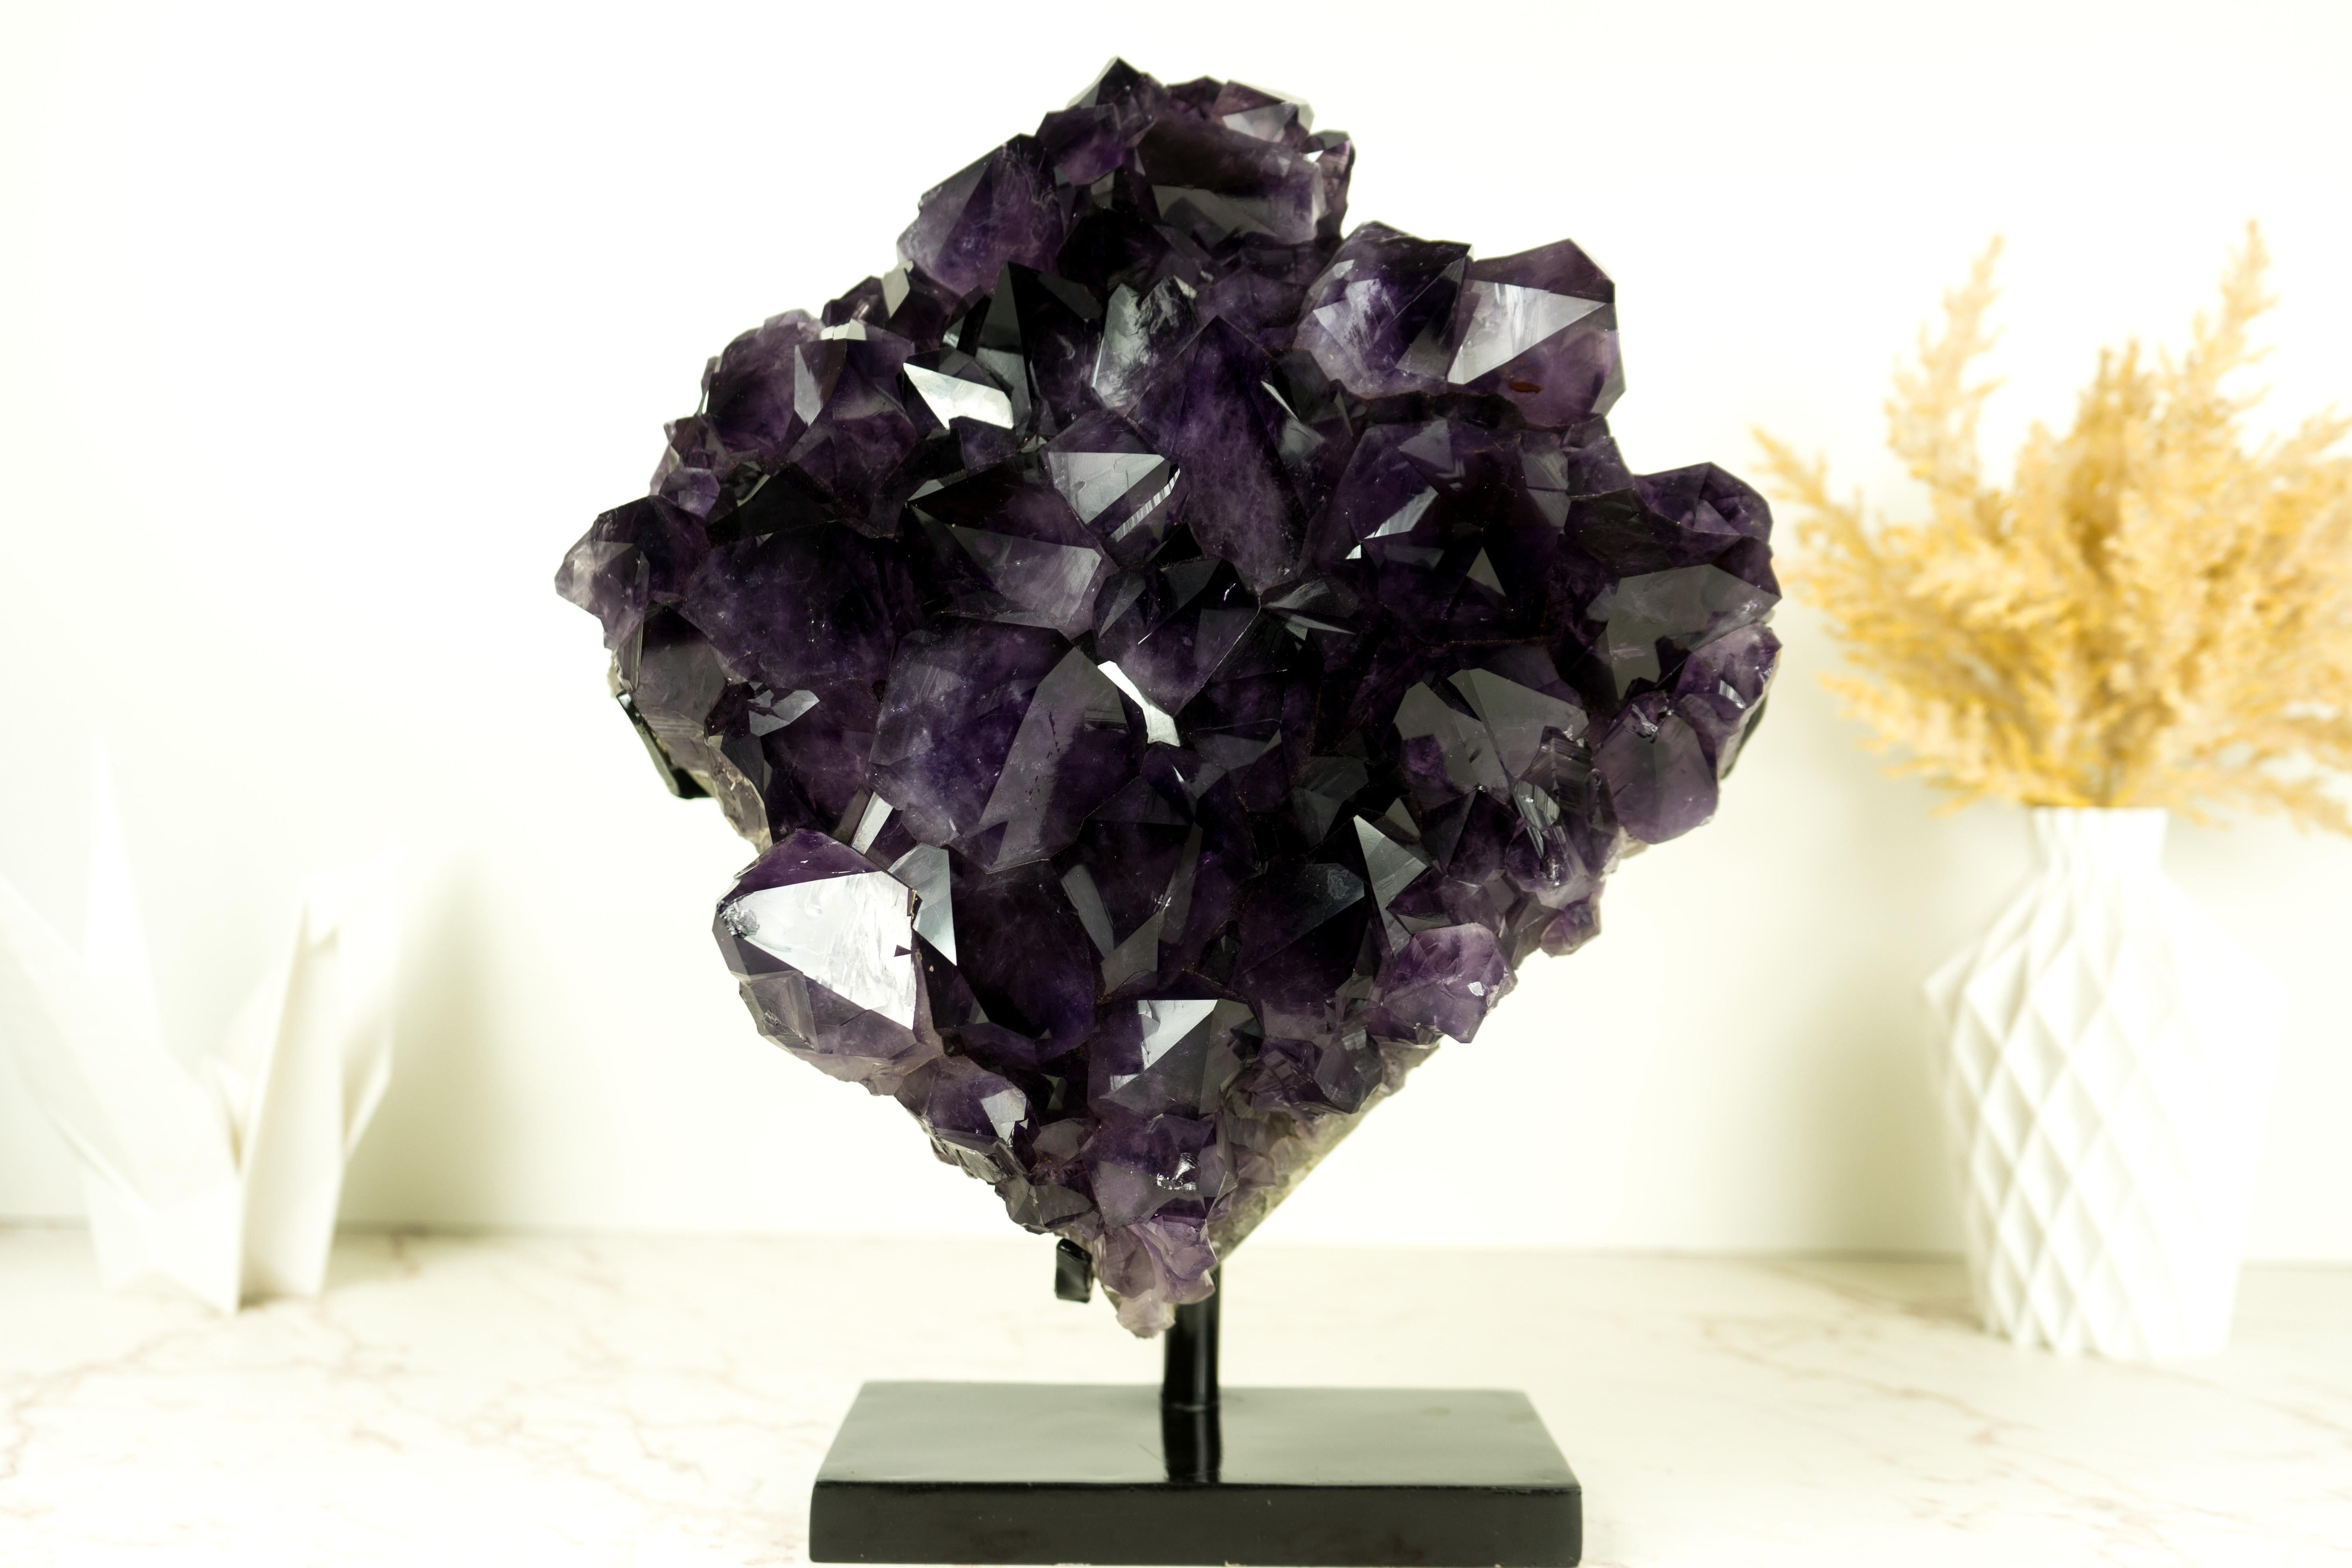 An Amethyst Cluster that is naturally designed to be the statement piece in your crystal gallery or the central element in your space decor. this specimen offers rarely-seen aesthetics that blend beautifully with the perfection of its points and